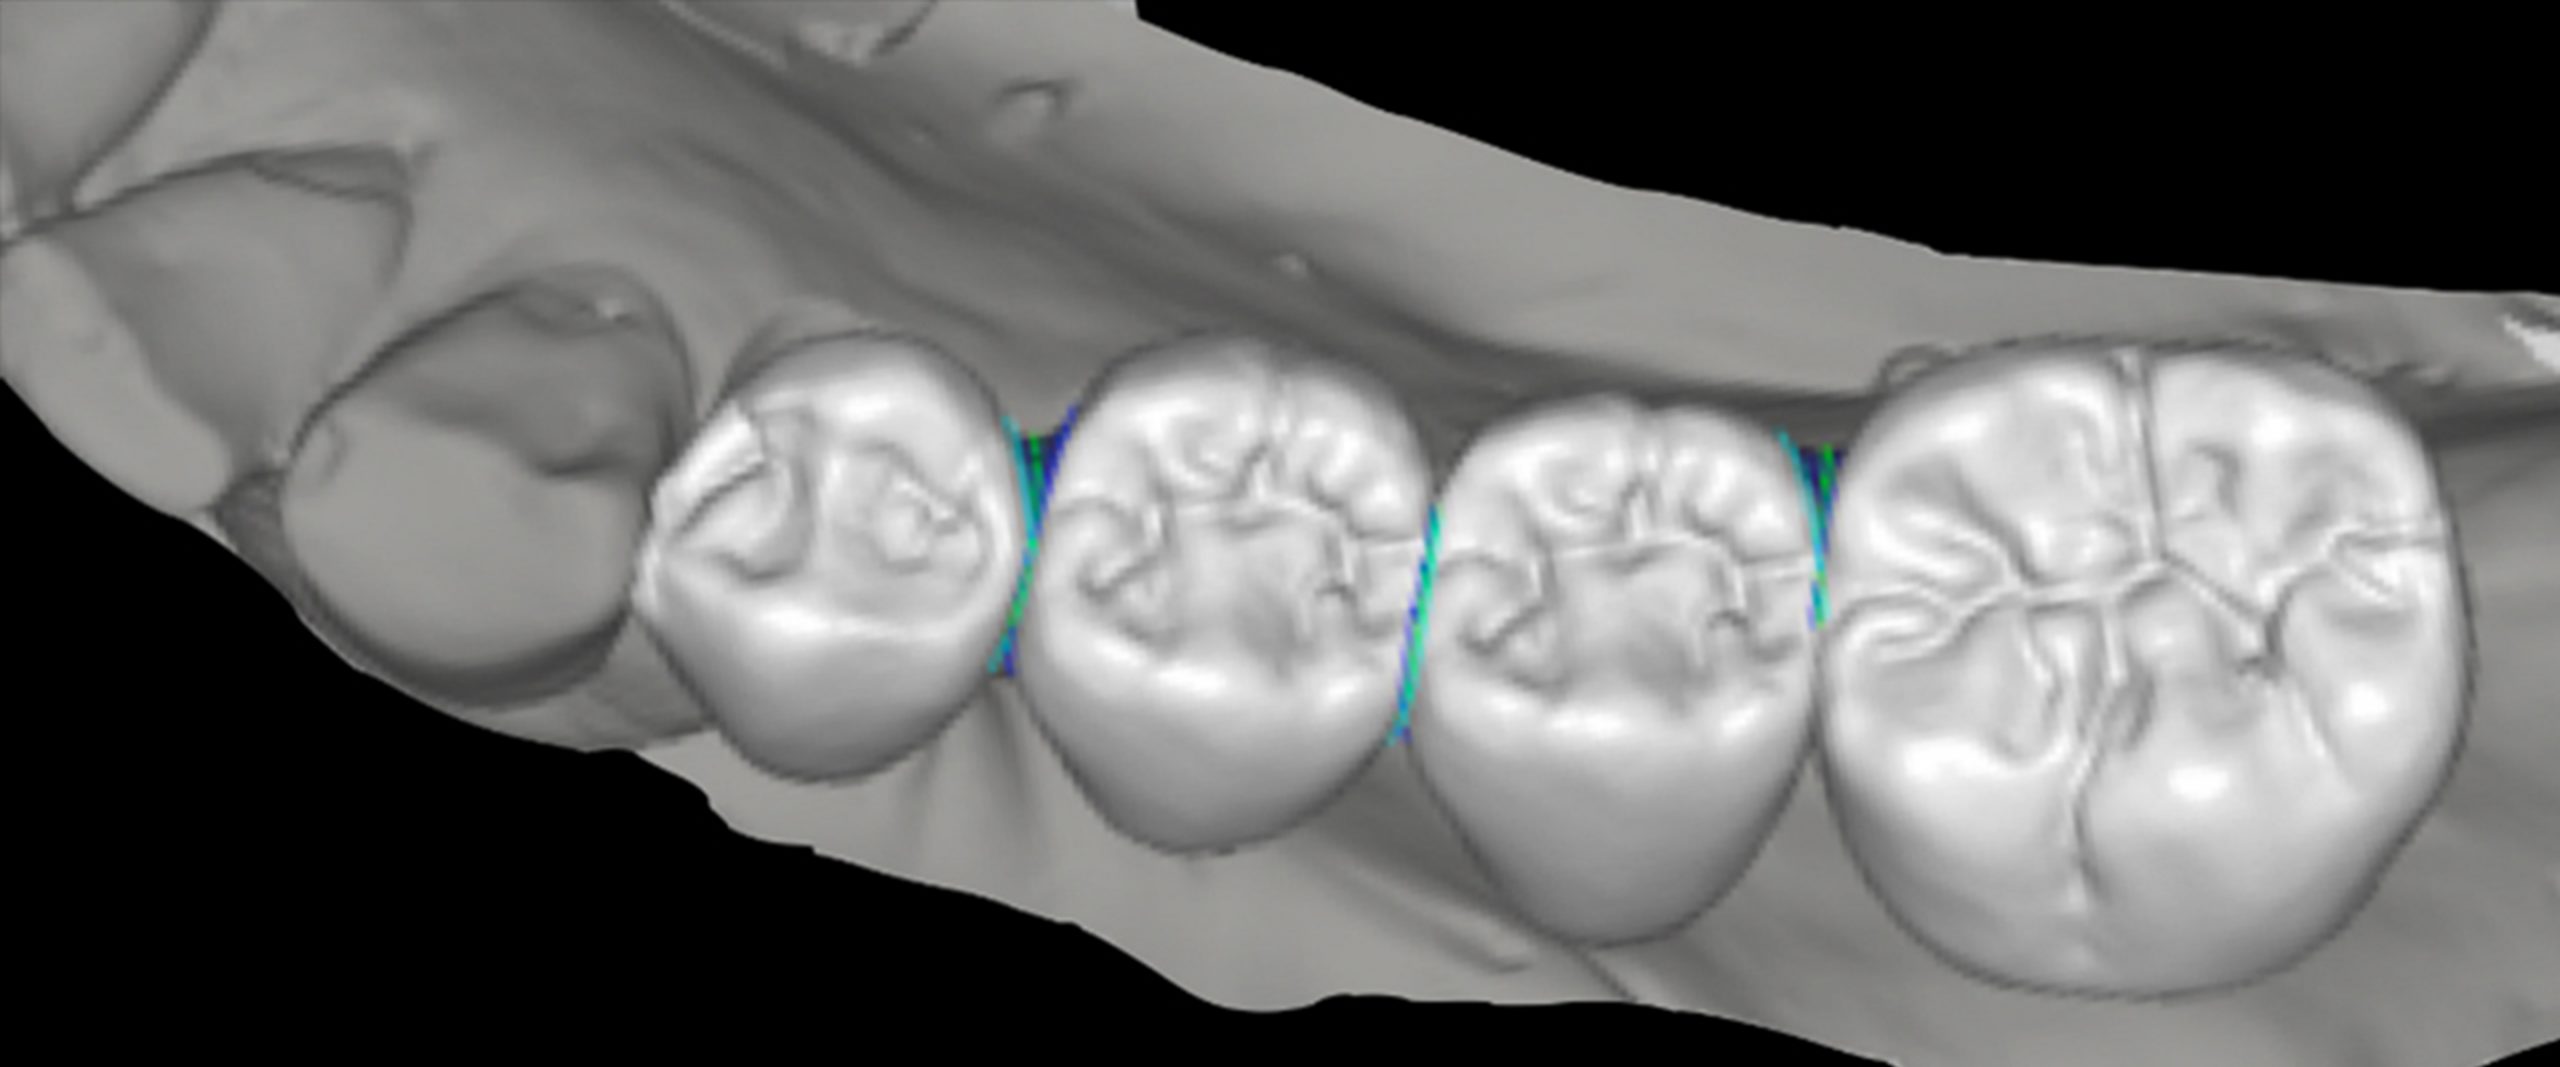 materials in implant dentistry: Overview - Blog